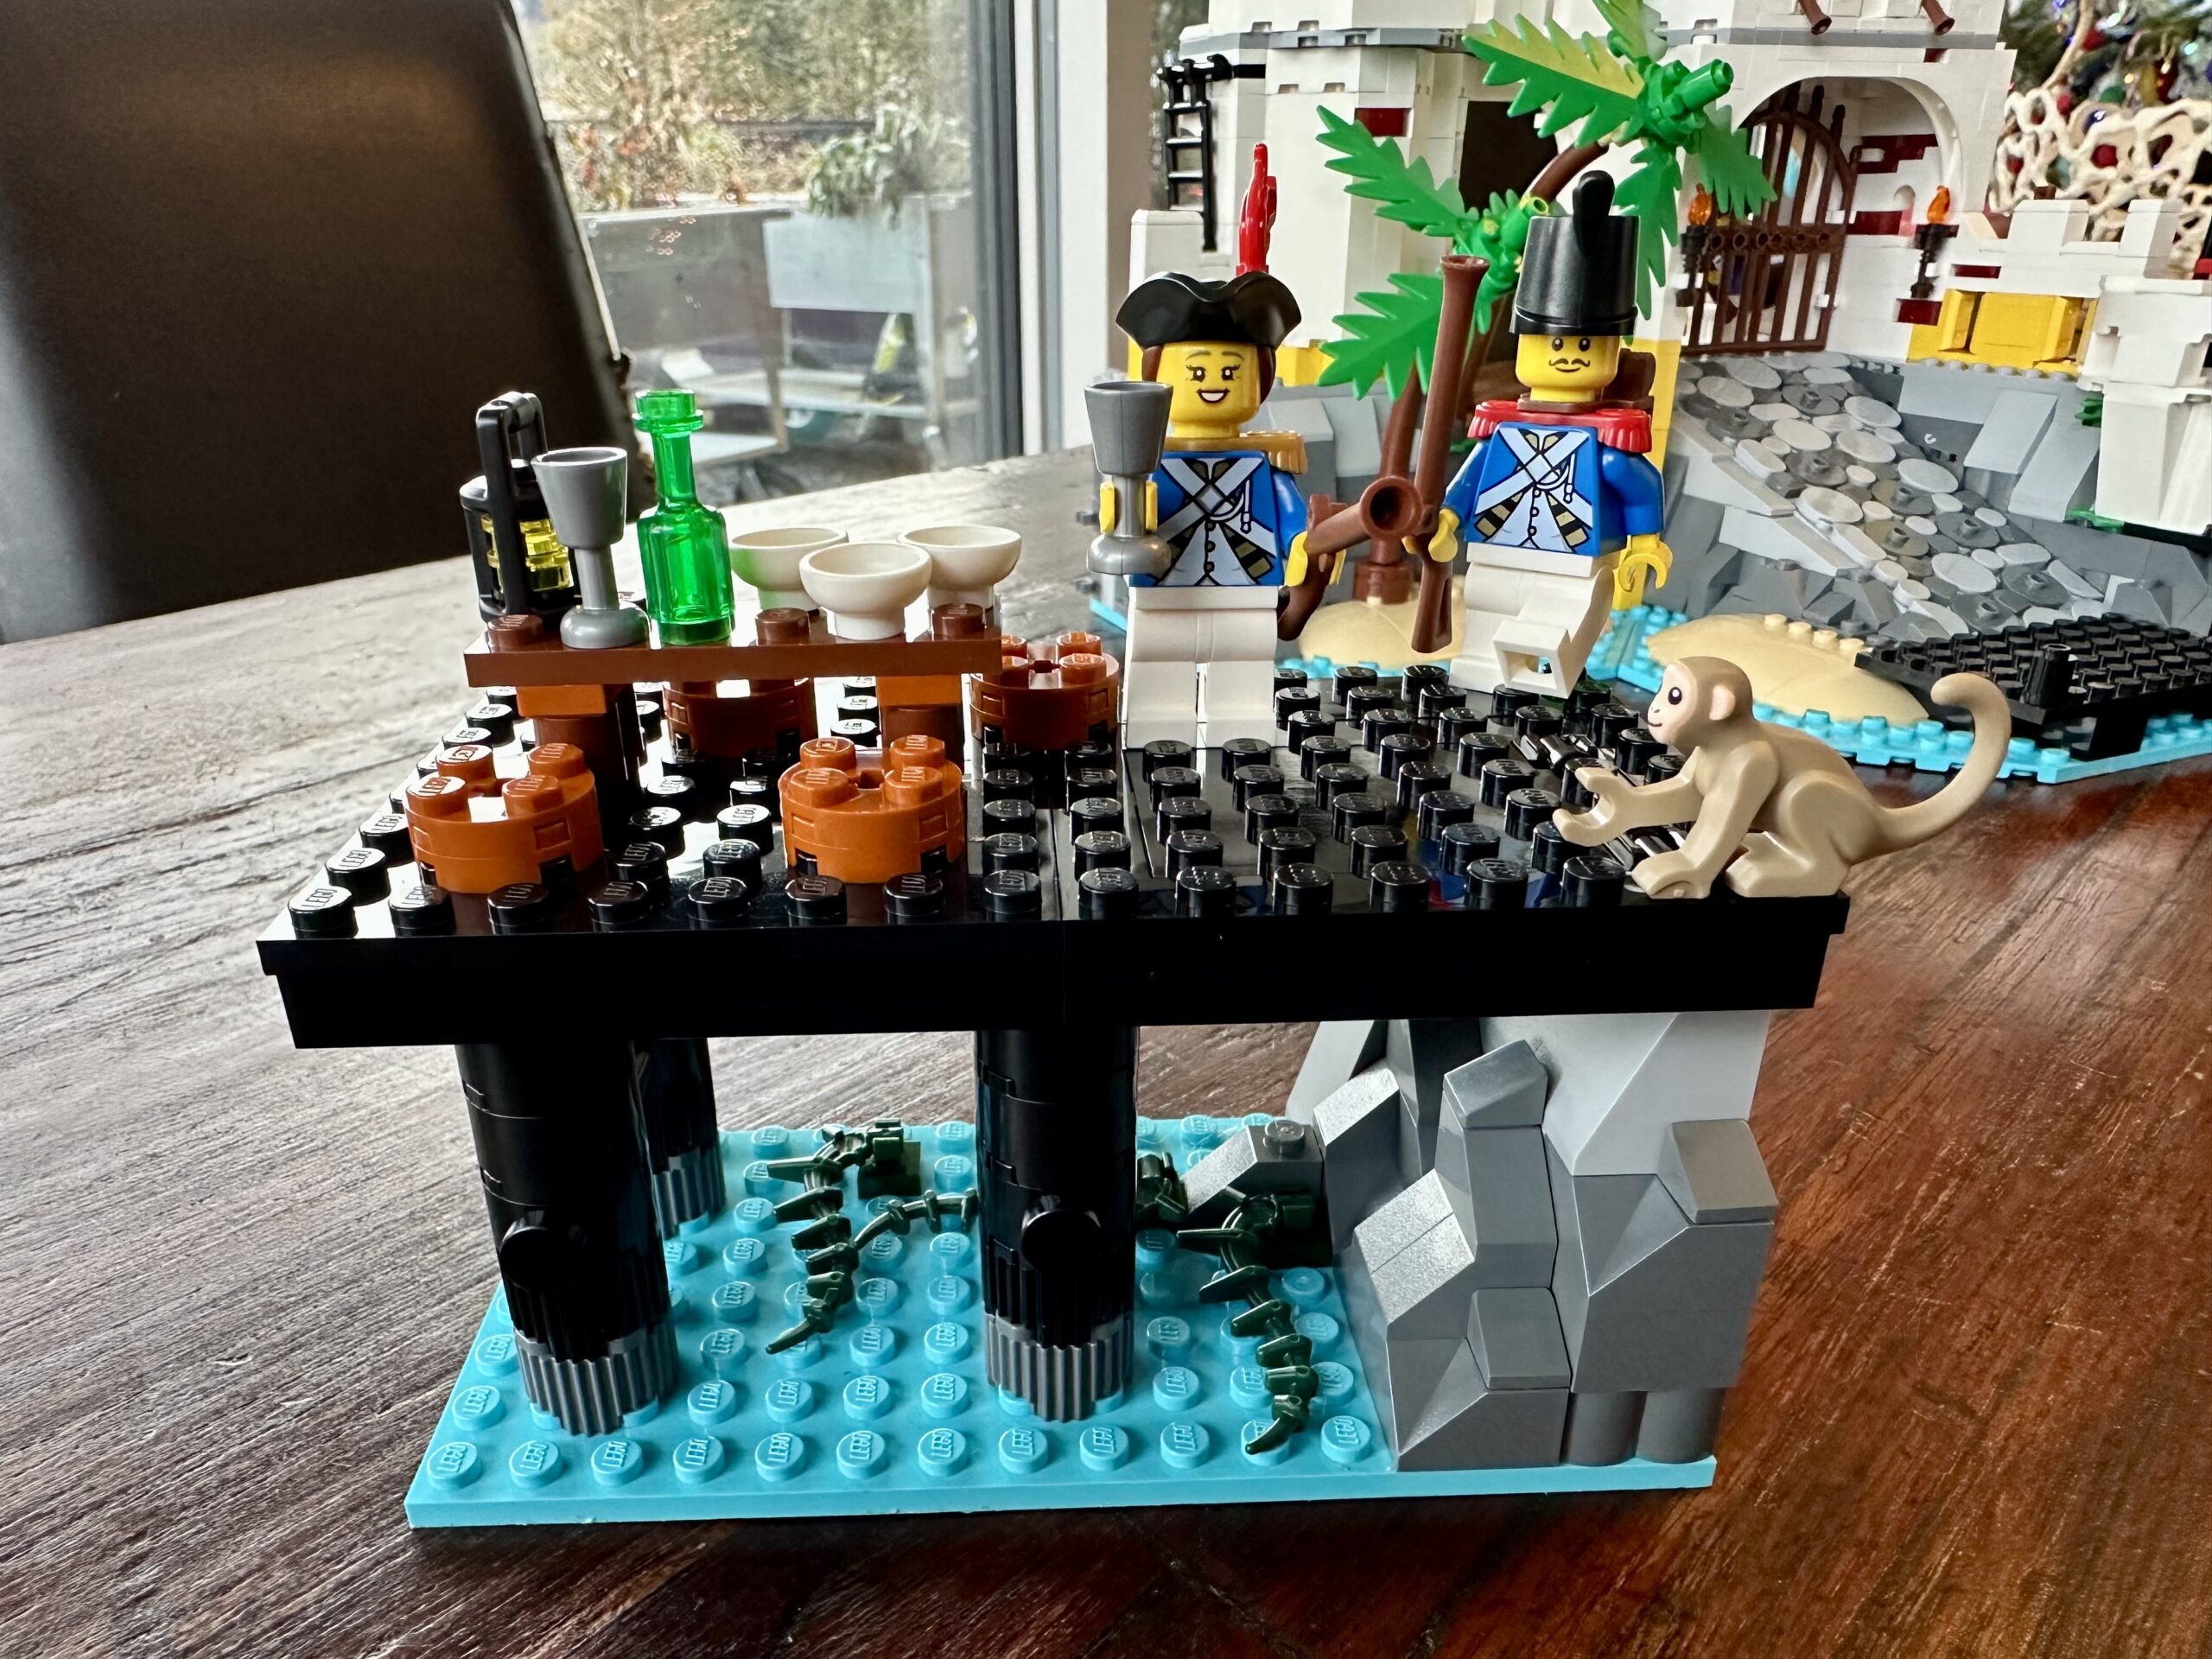 LEGO build of set 10320 Eldorado Fortress in progress. A small black jetty bearing a table set for a feast. Two Imperial guards look to be celebrating with a monkey.